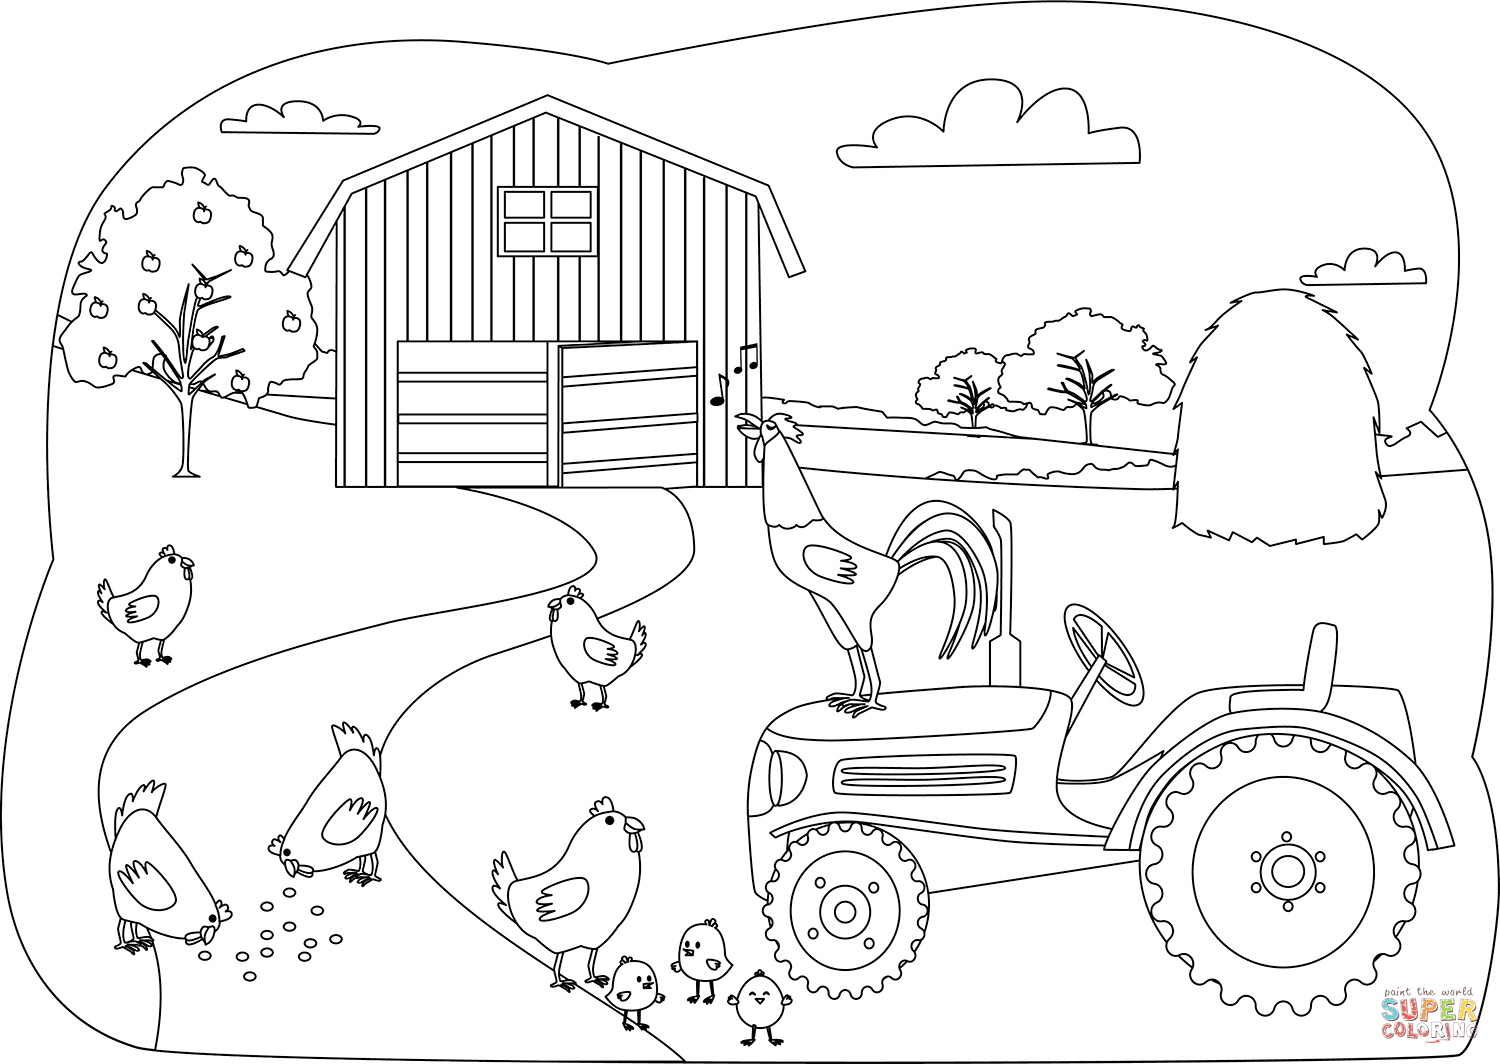 Chickens on the farm coloring page free printable coloring pages